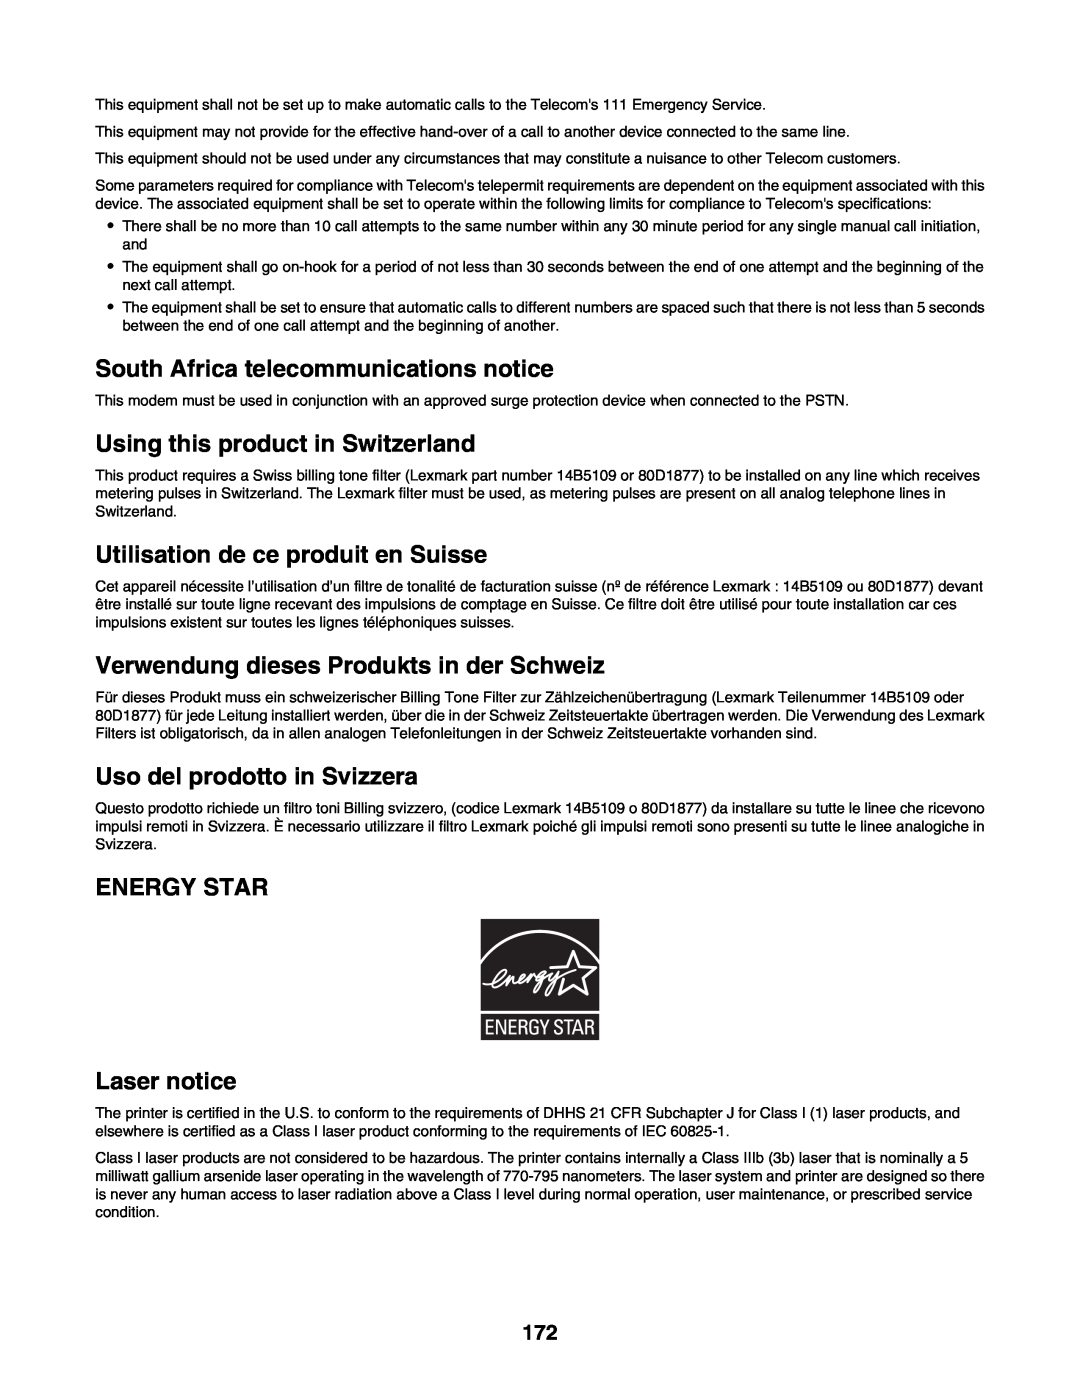 Lexmark C935 manual South Africa telecommunications notice, Using this product in Switzerland, Uso del prodotto in Svizzera 